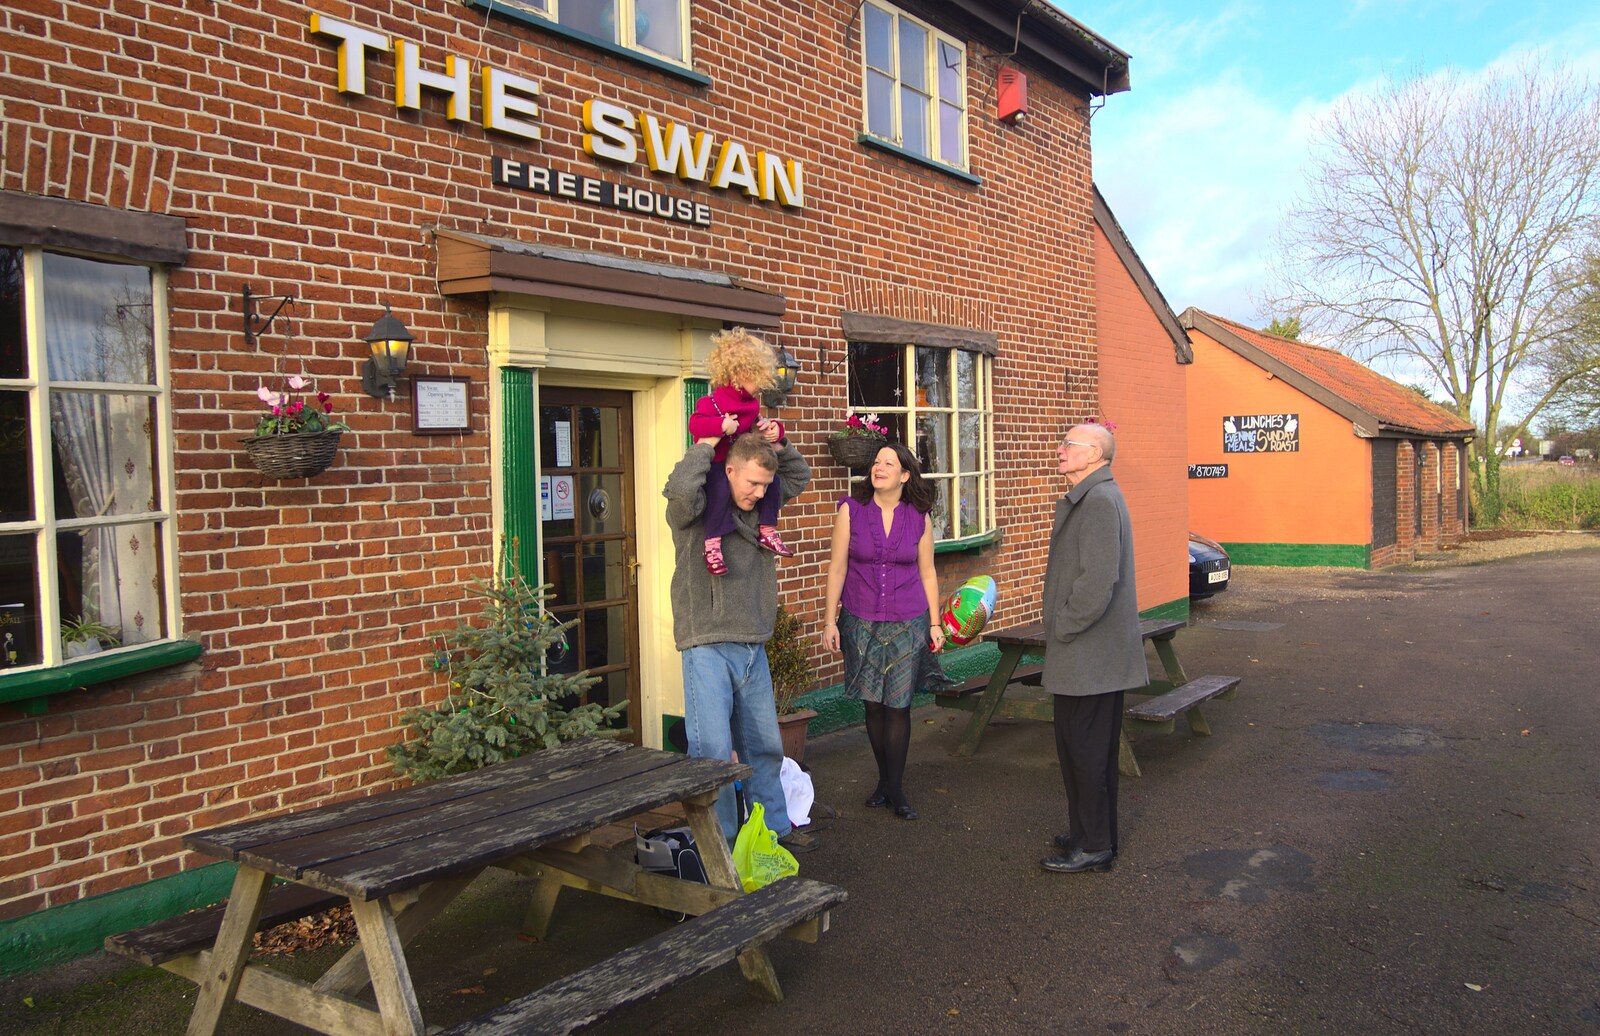 Outside, the Mikey P massive chat to Grandad from Christmas Day in the Swan Inn, Brome, Suffolk - 25th December 2011